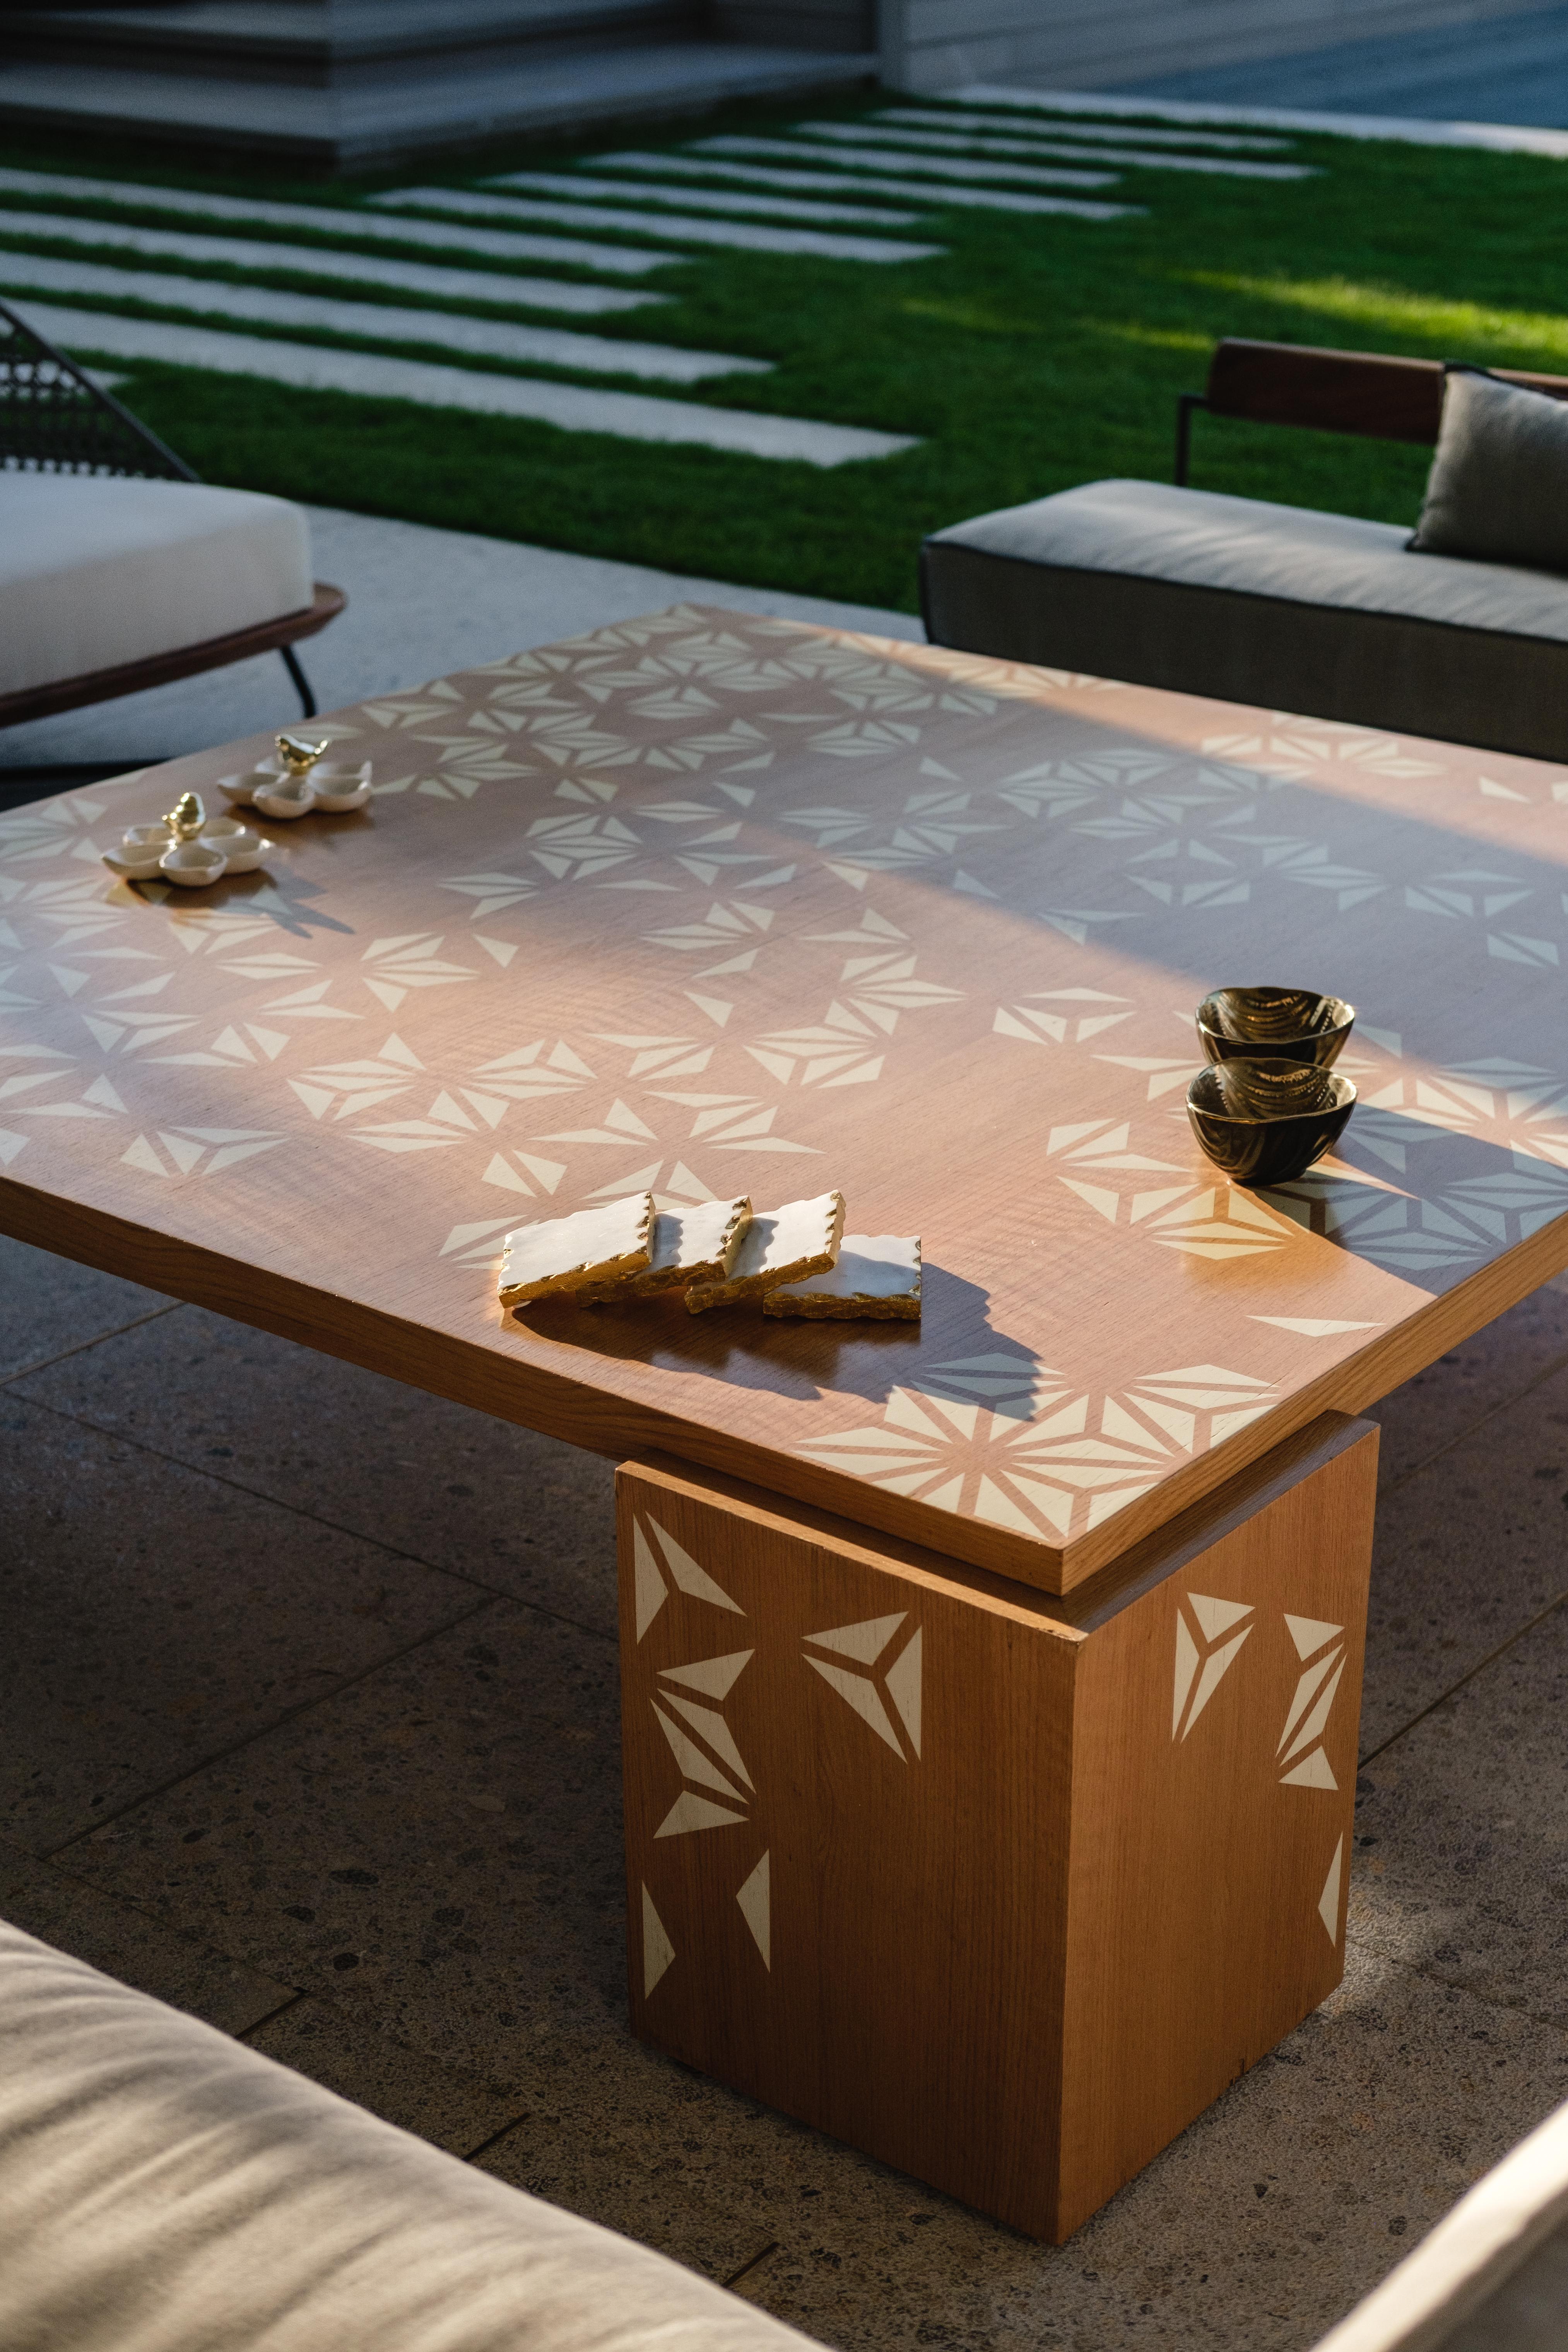 Egyptian Large Square Oak Wood Coffee Table with Asymmetric Stenciled Design For Sale